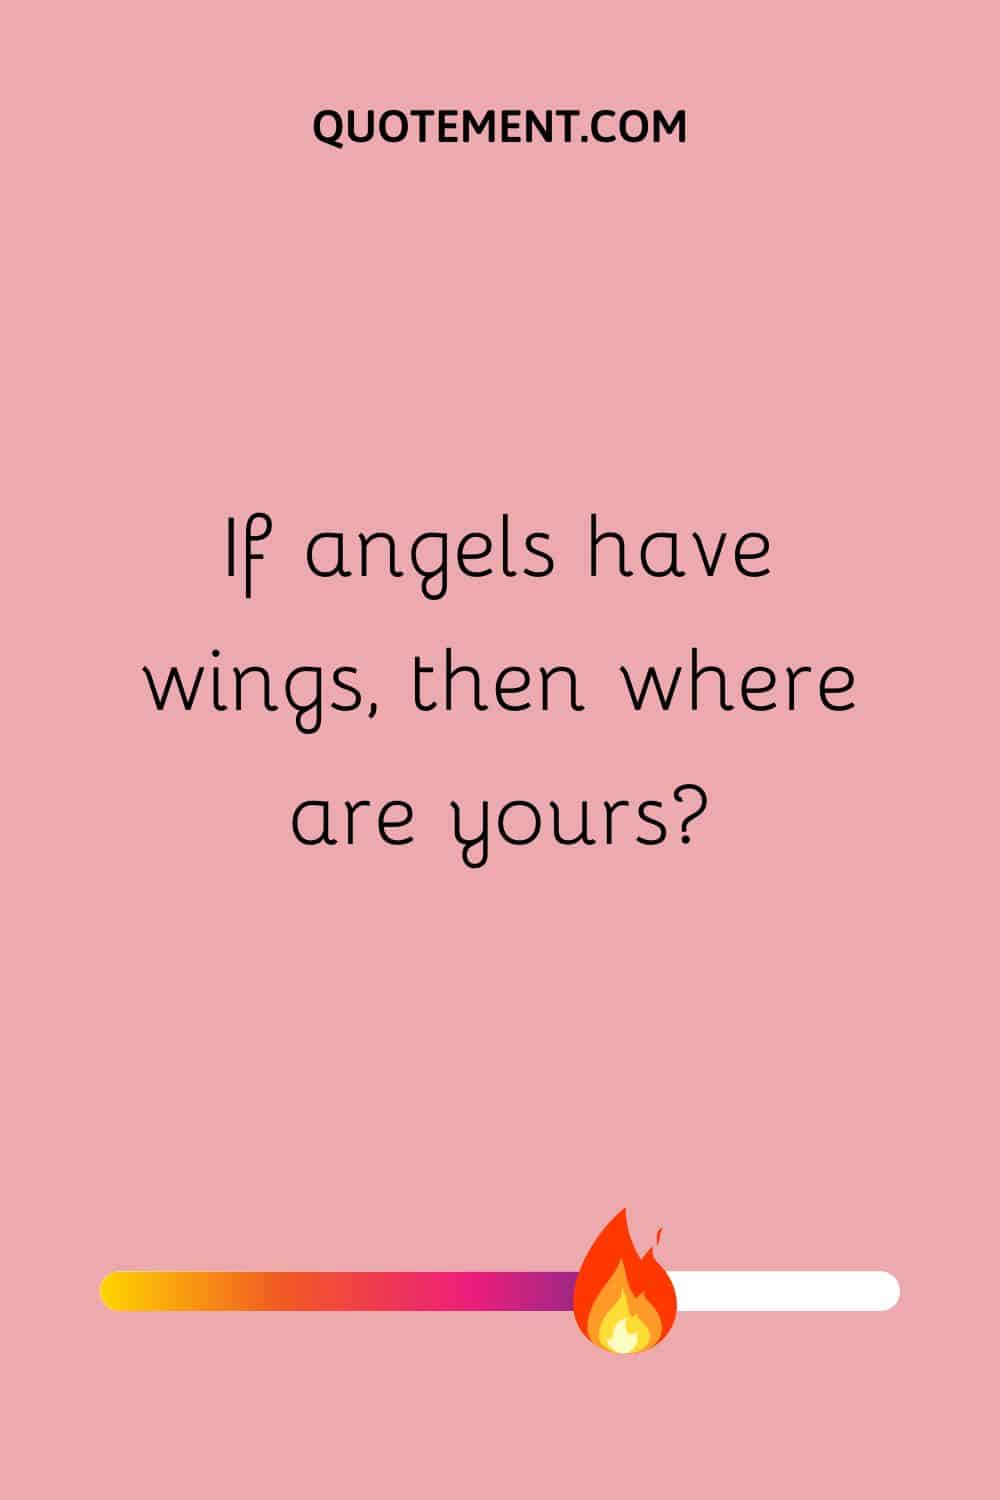 If angels have wings, then where are yours